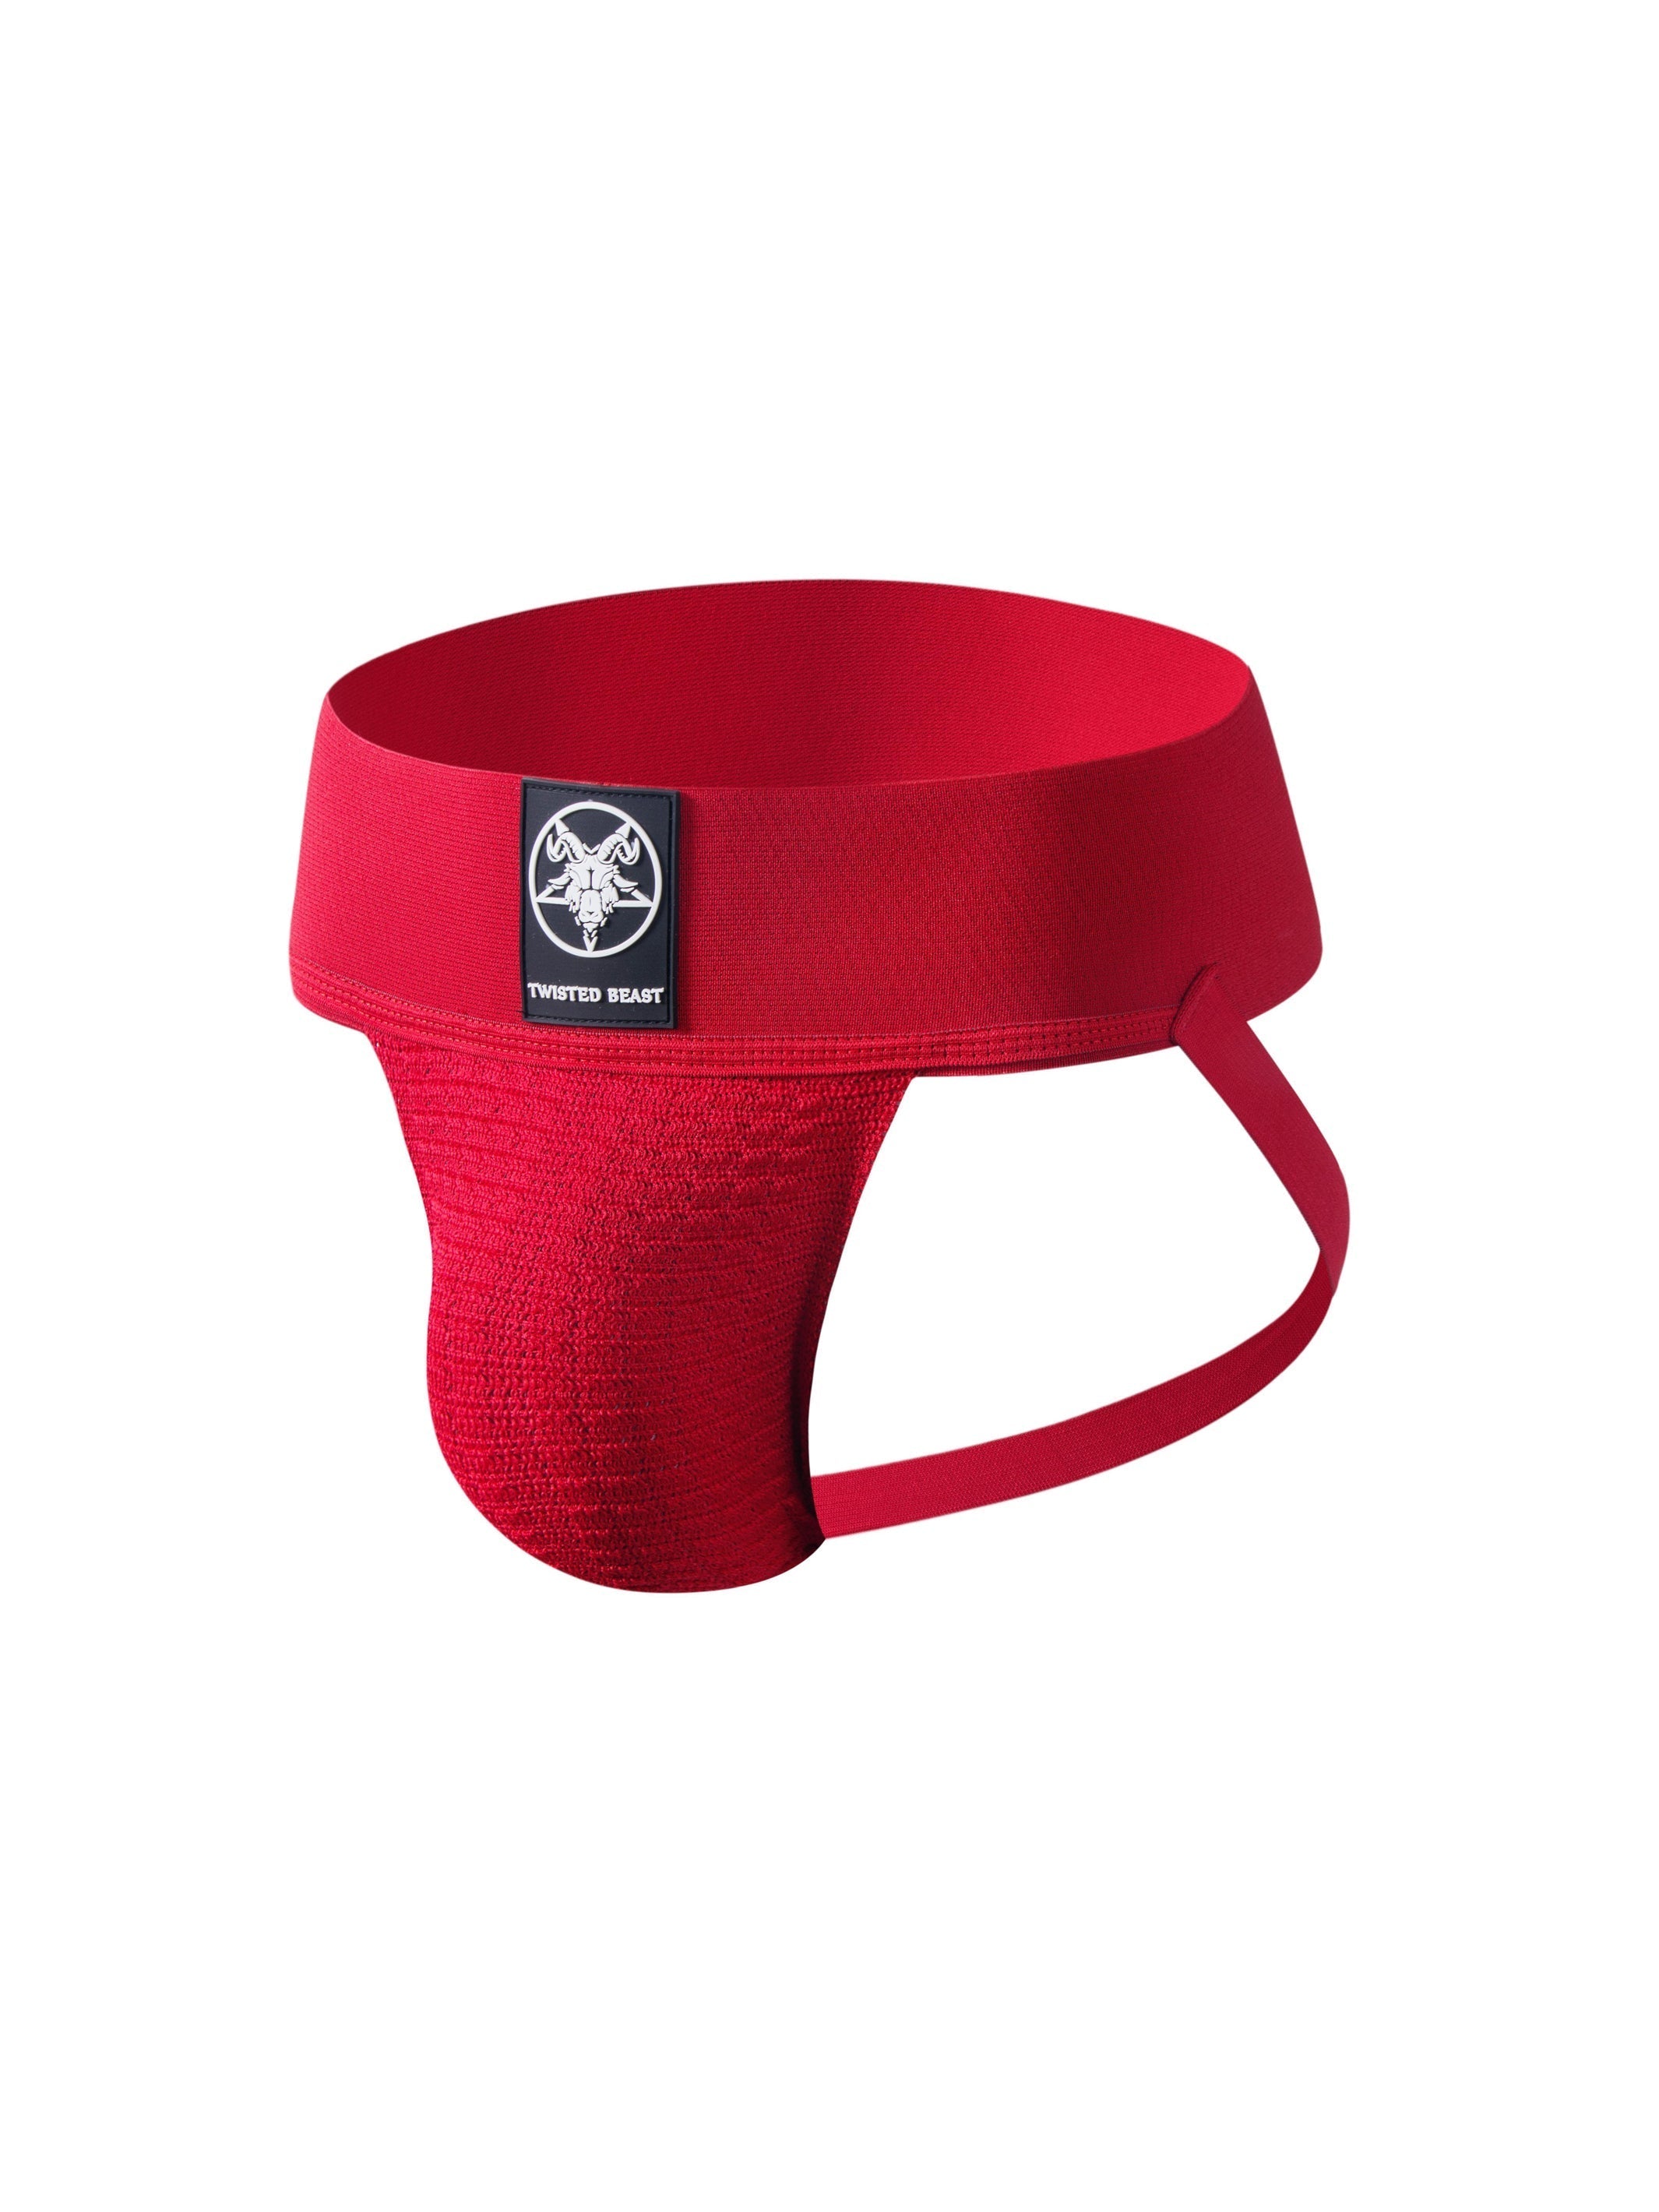 A product photo of a red mesh Locker Jock from the side.